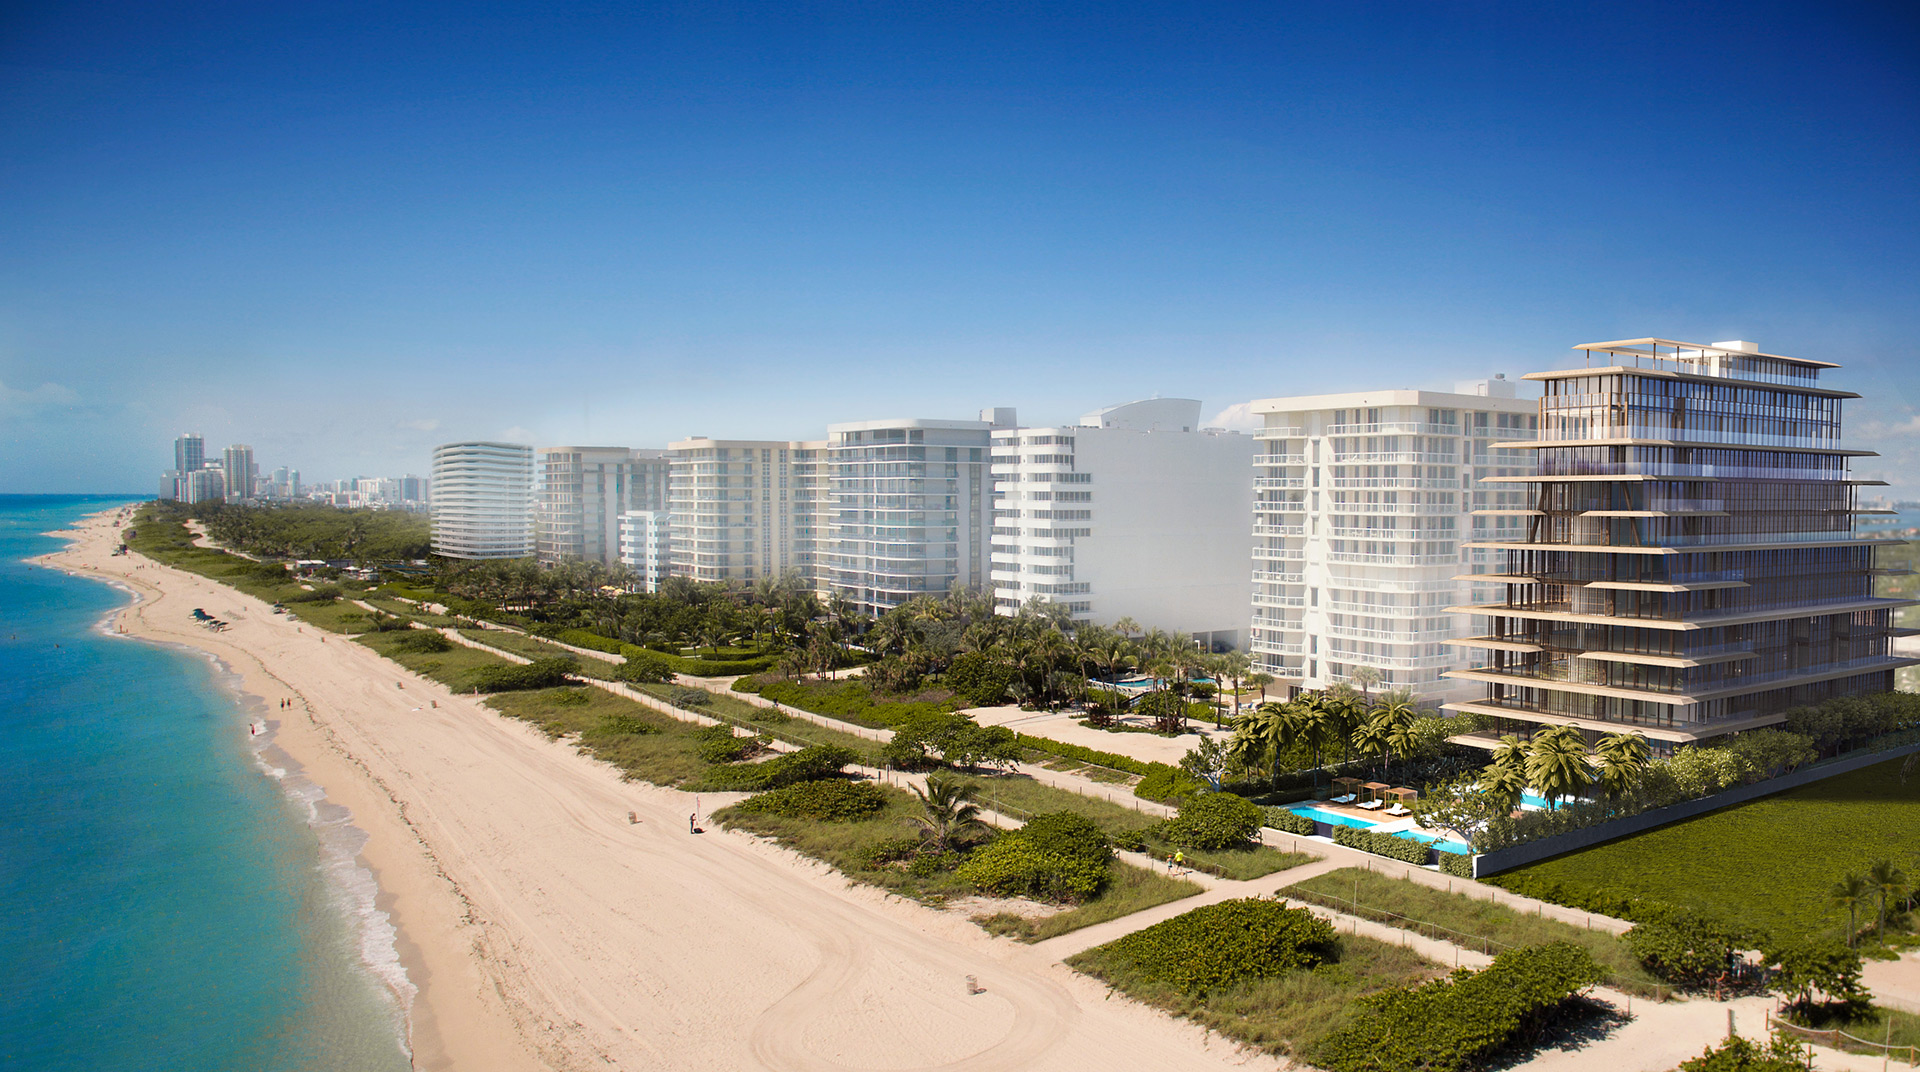 ‘Arte’ condo top out in Surfside